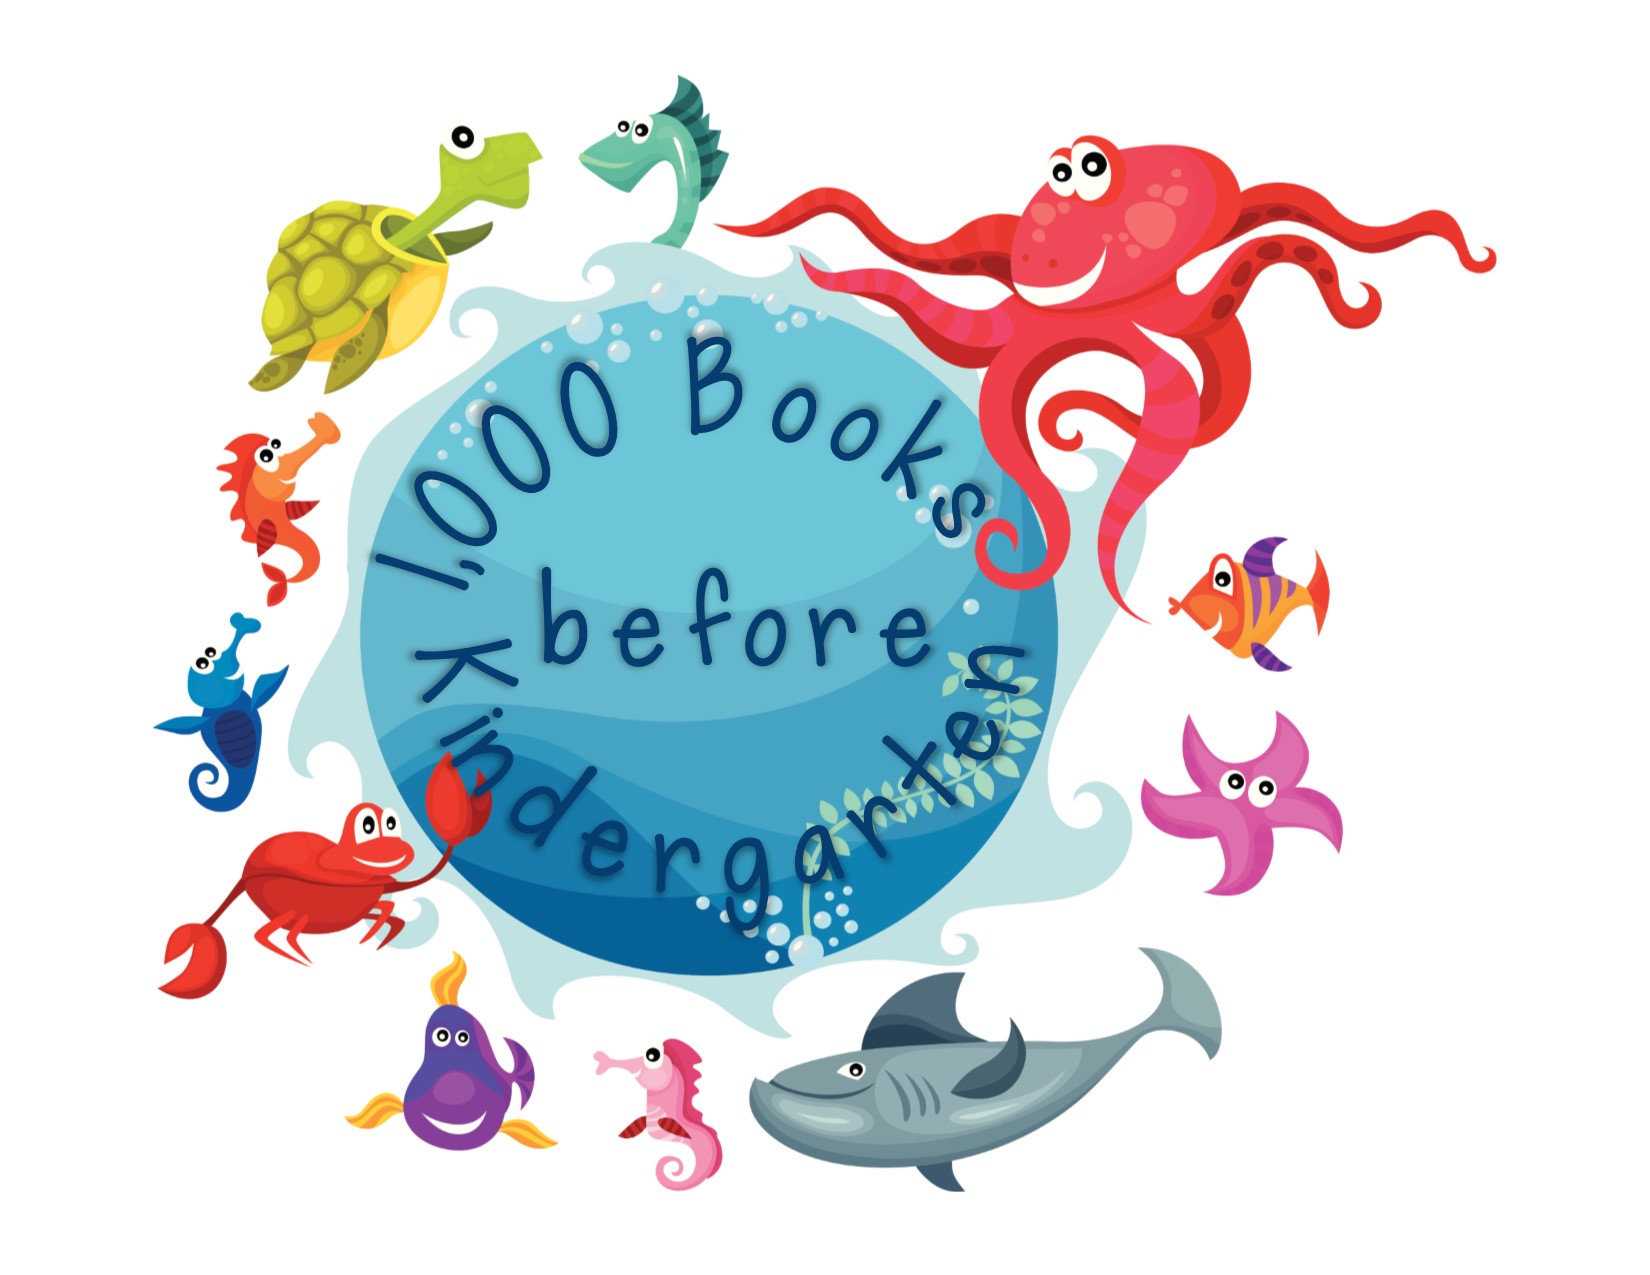 1000 Books before Kindergarten surrounded by aquatic animals